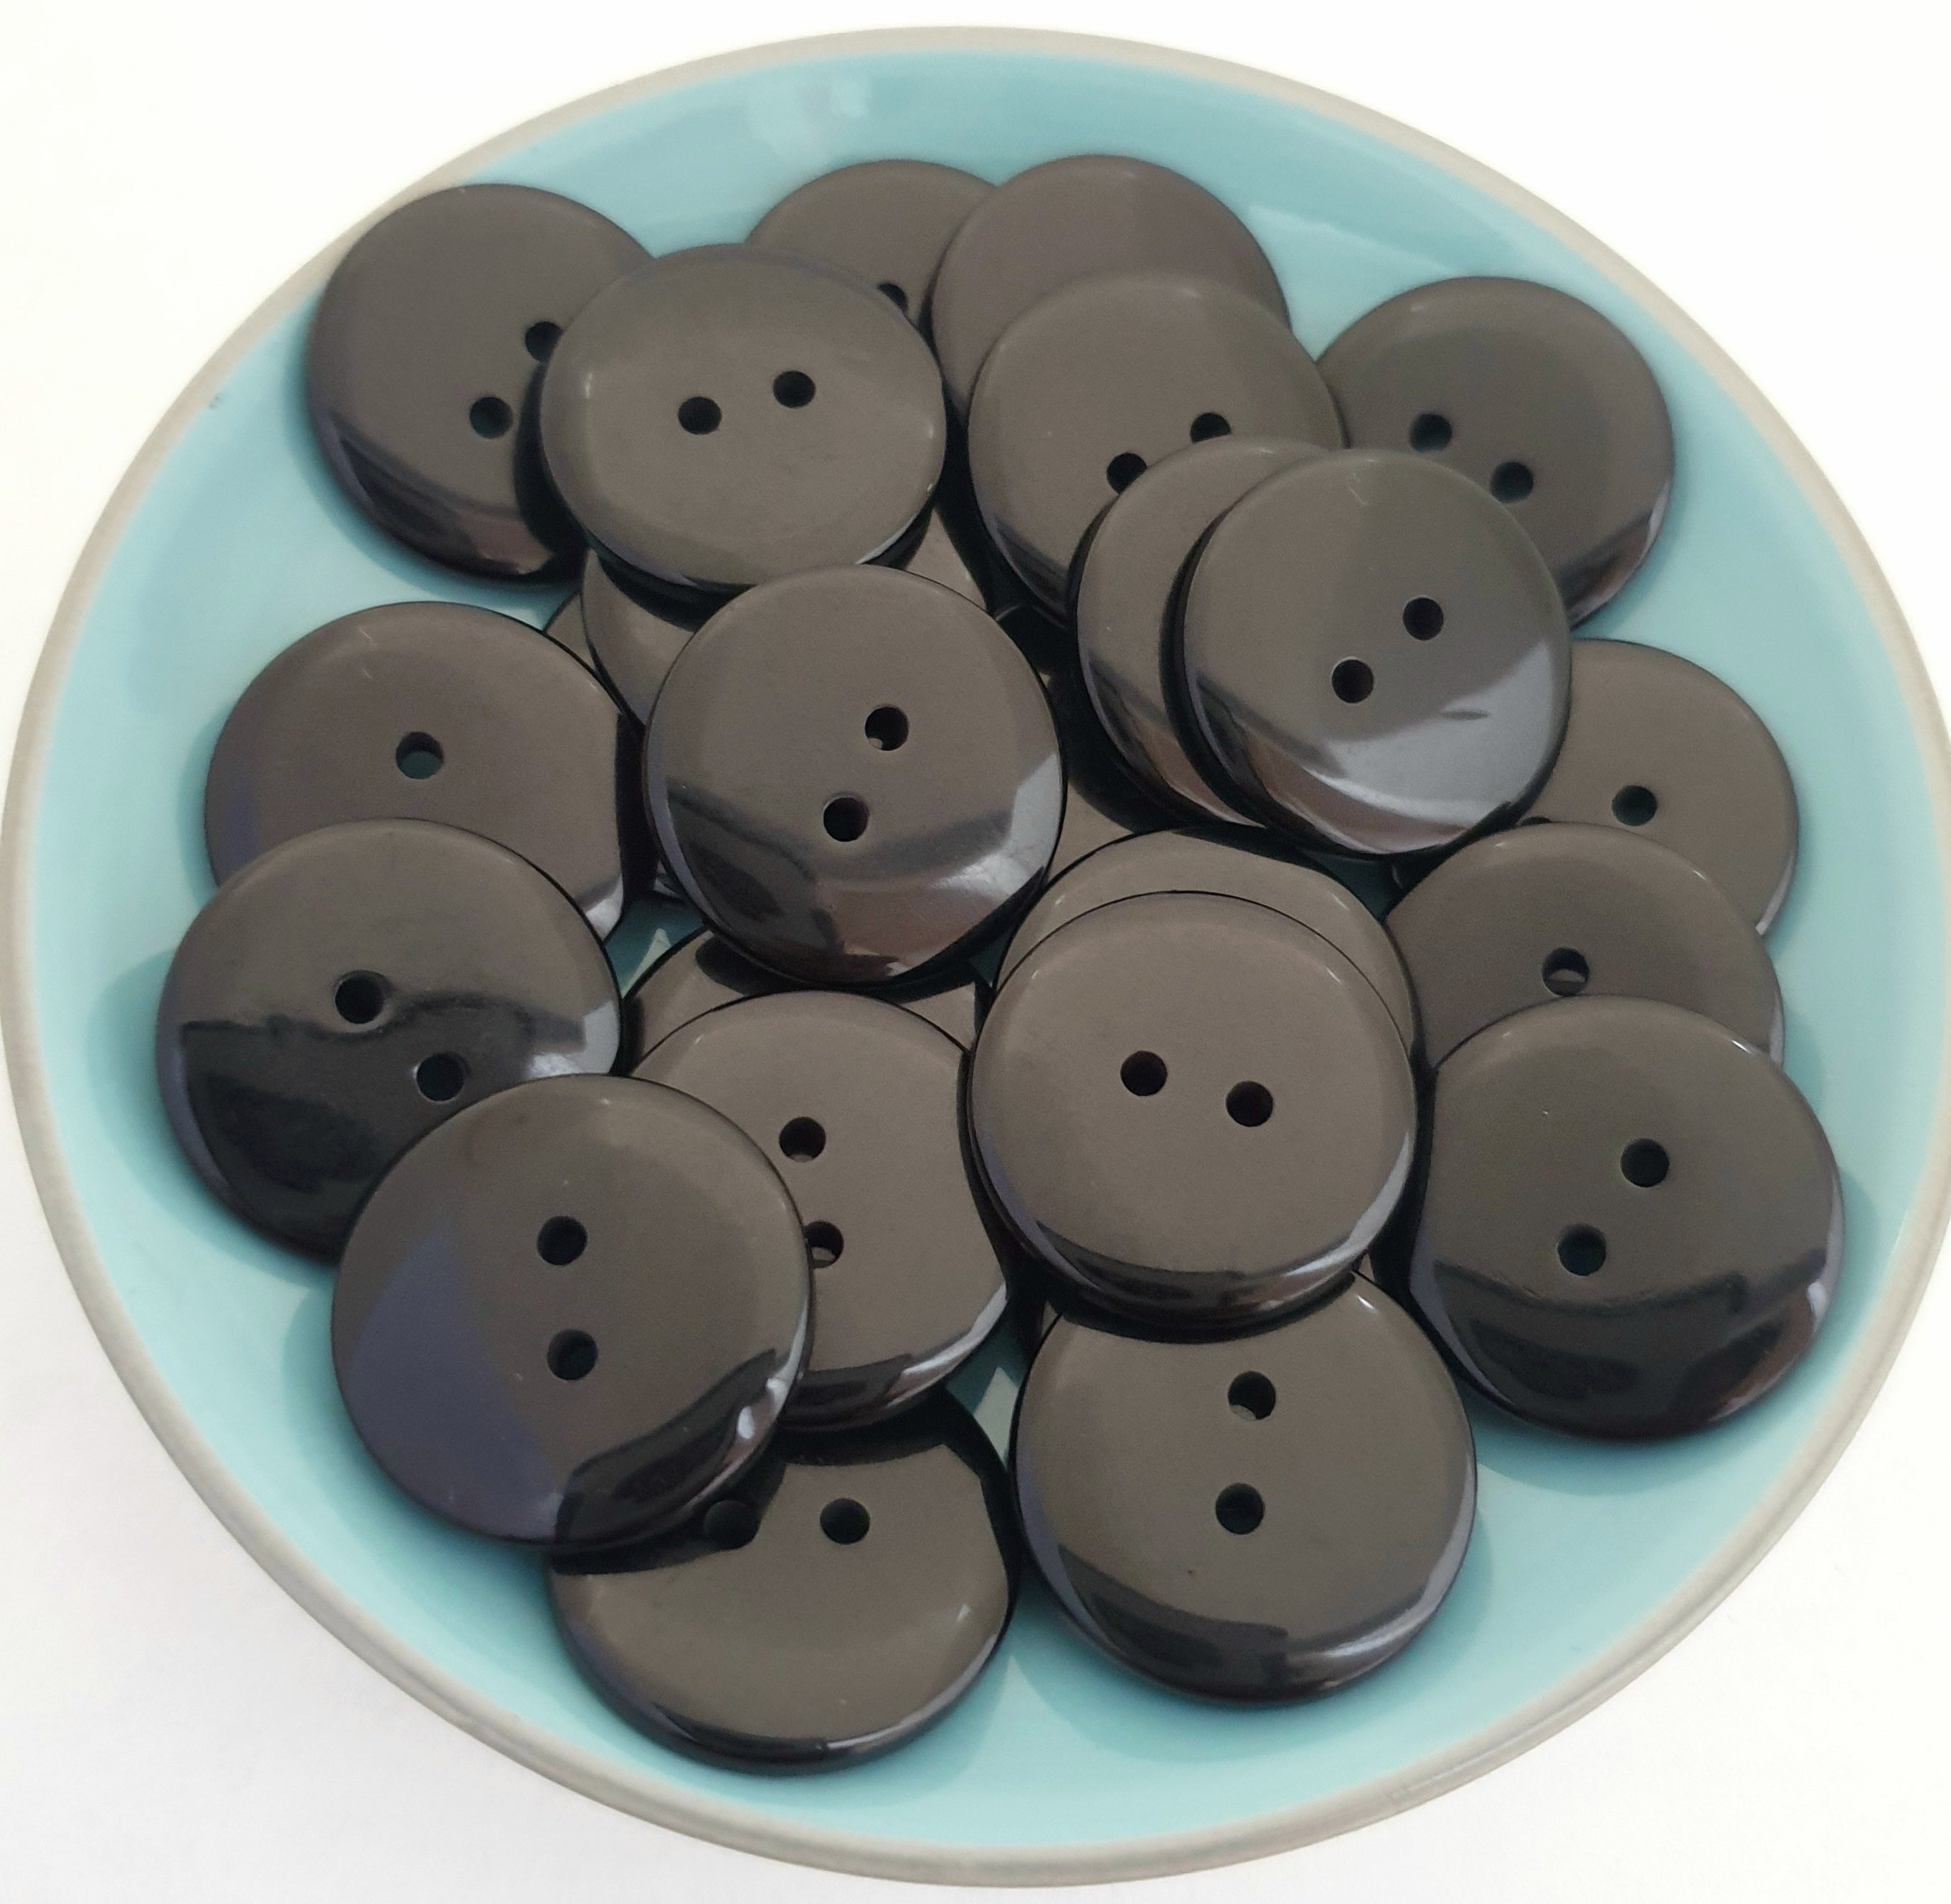 MajorCrafts 12pcs 30mm Black 2 holes Large Round Resin Sewing Buttons